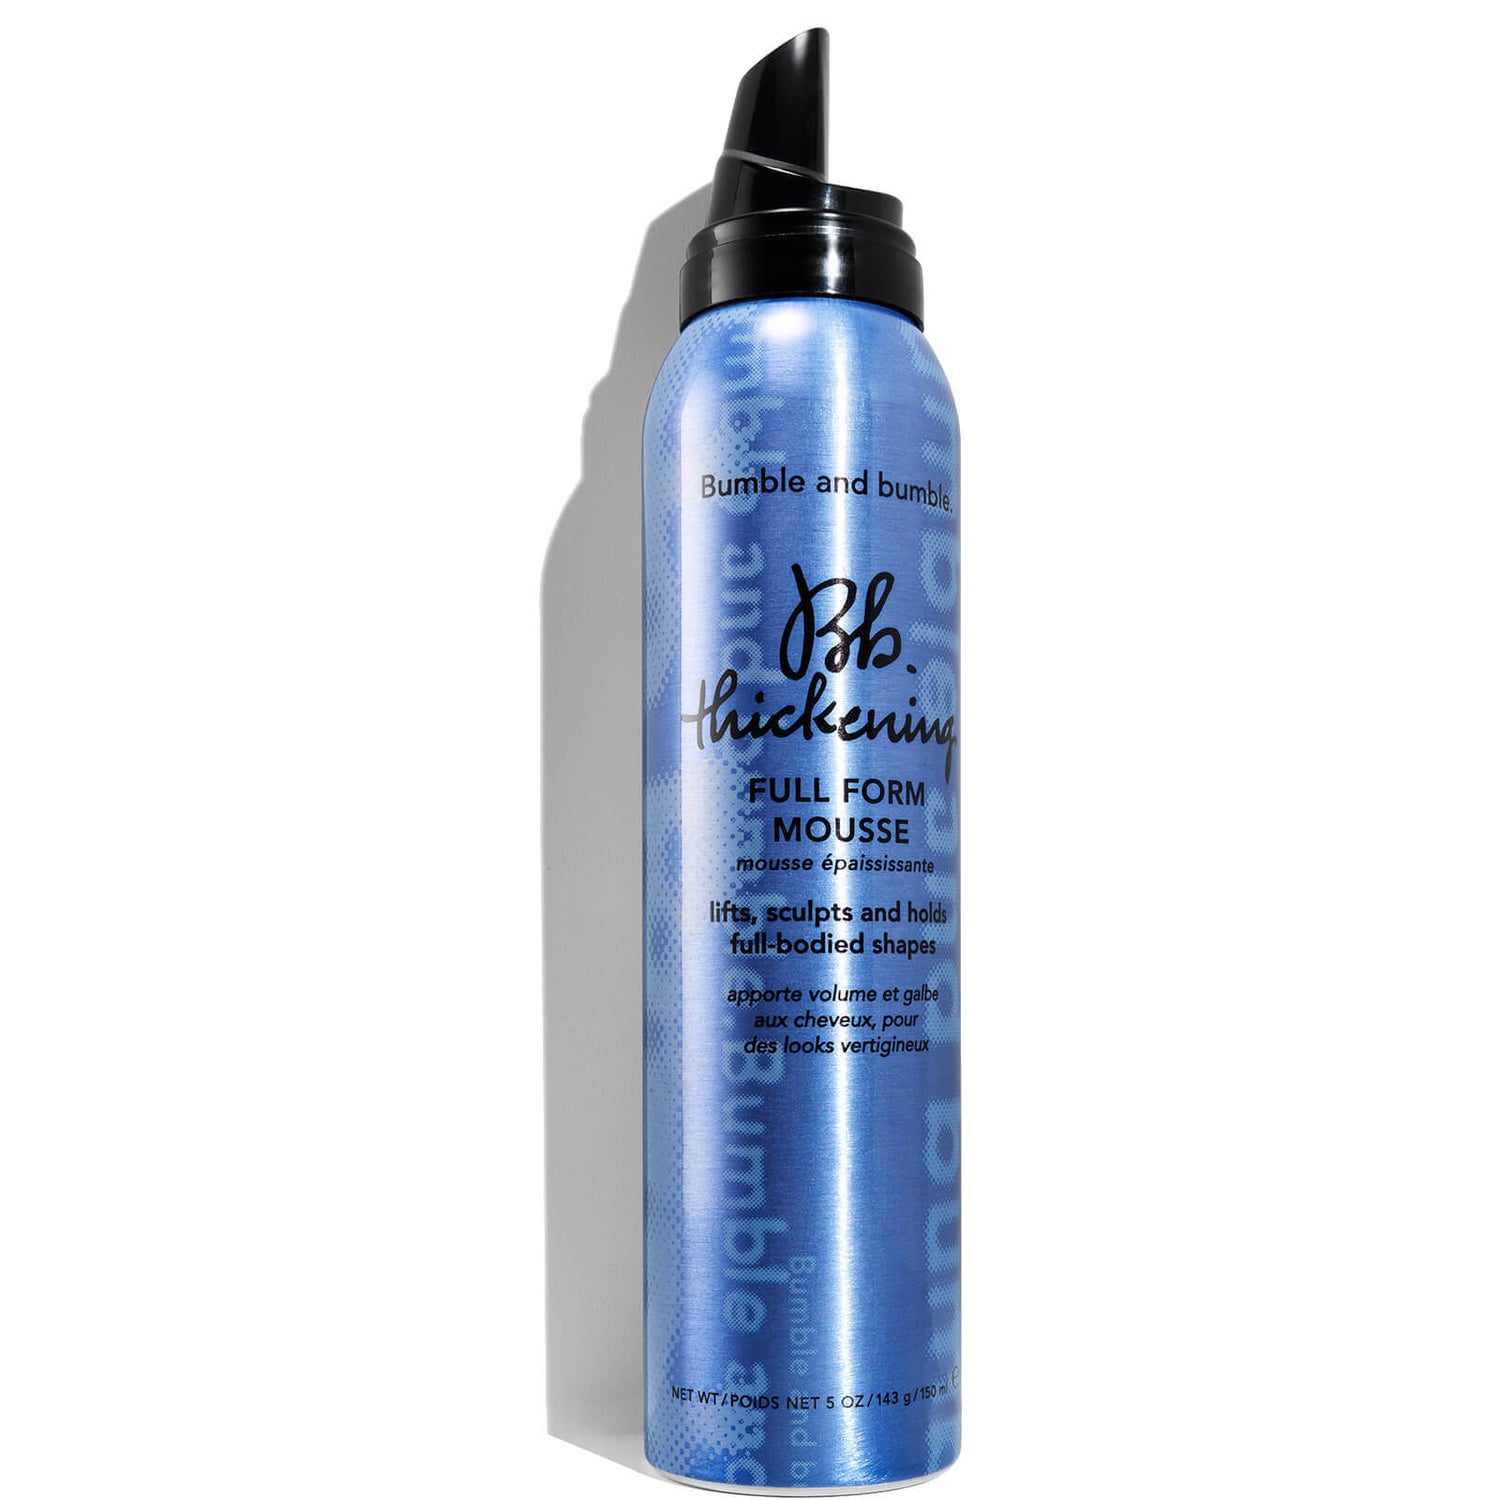 Bumble and bumble Thickening Full Form Mousse 143 g)